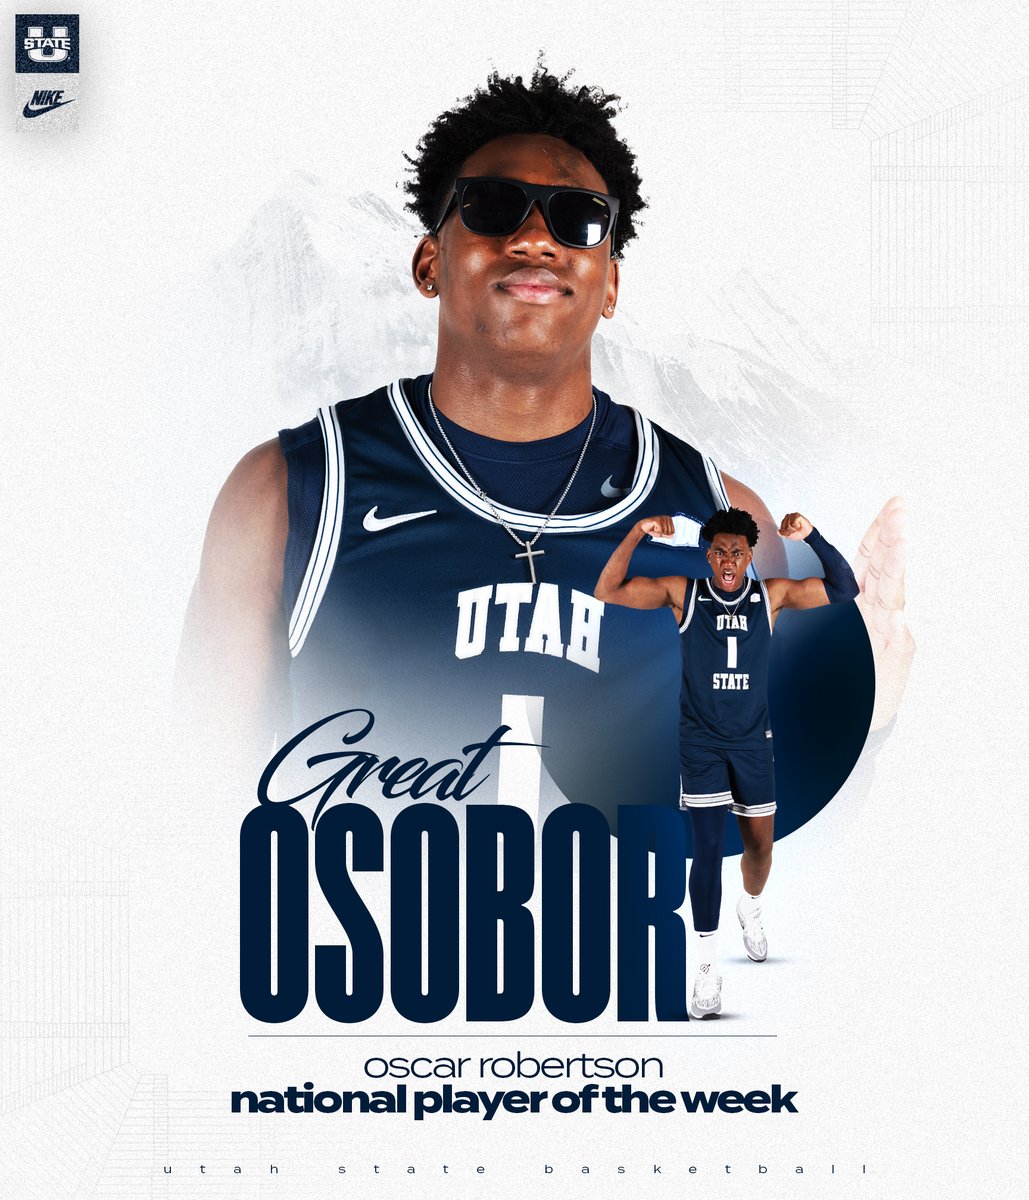 𝐍𝐀𝐓𝐈𝐎𝐍𝐀𝐋 Player of the Week! Congrats to @GreatOsobor on being named an Oscar Robertson National Player of the Week! ➡️ bit.ly/48P6c4y